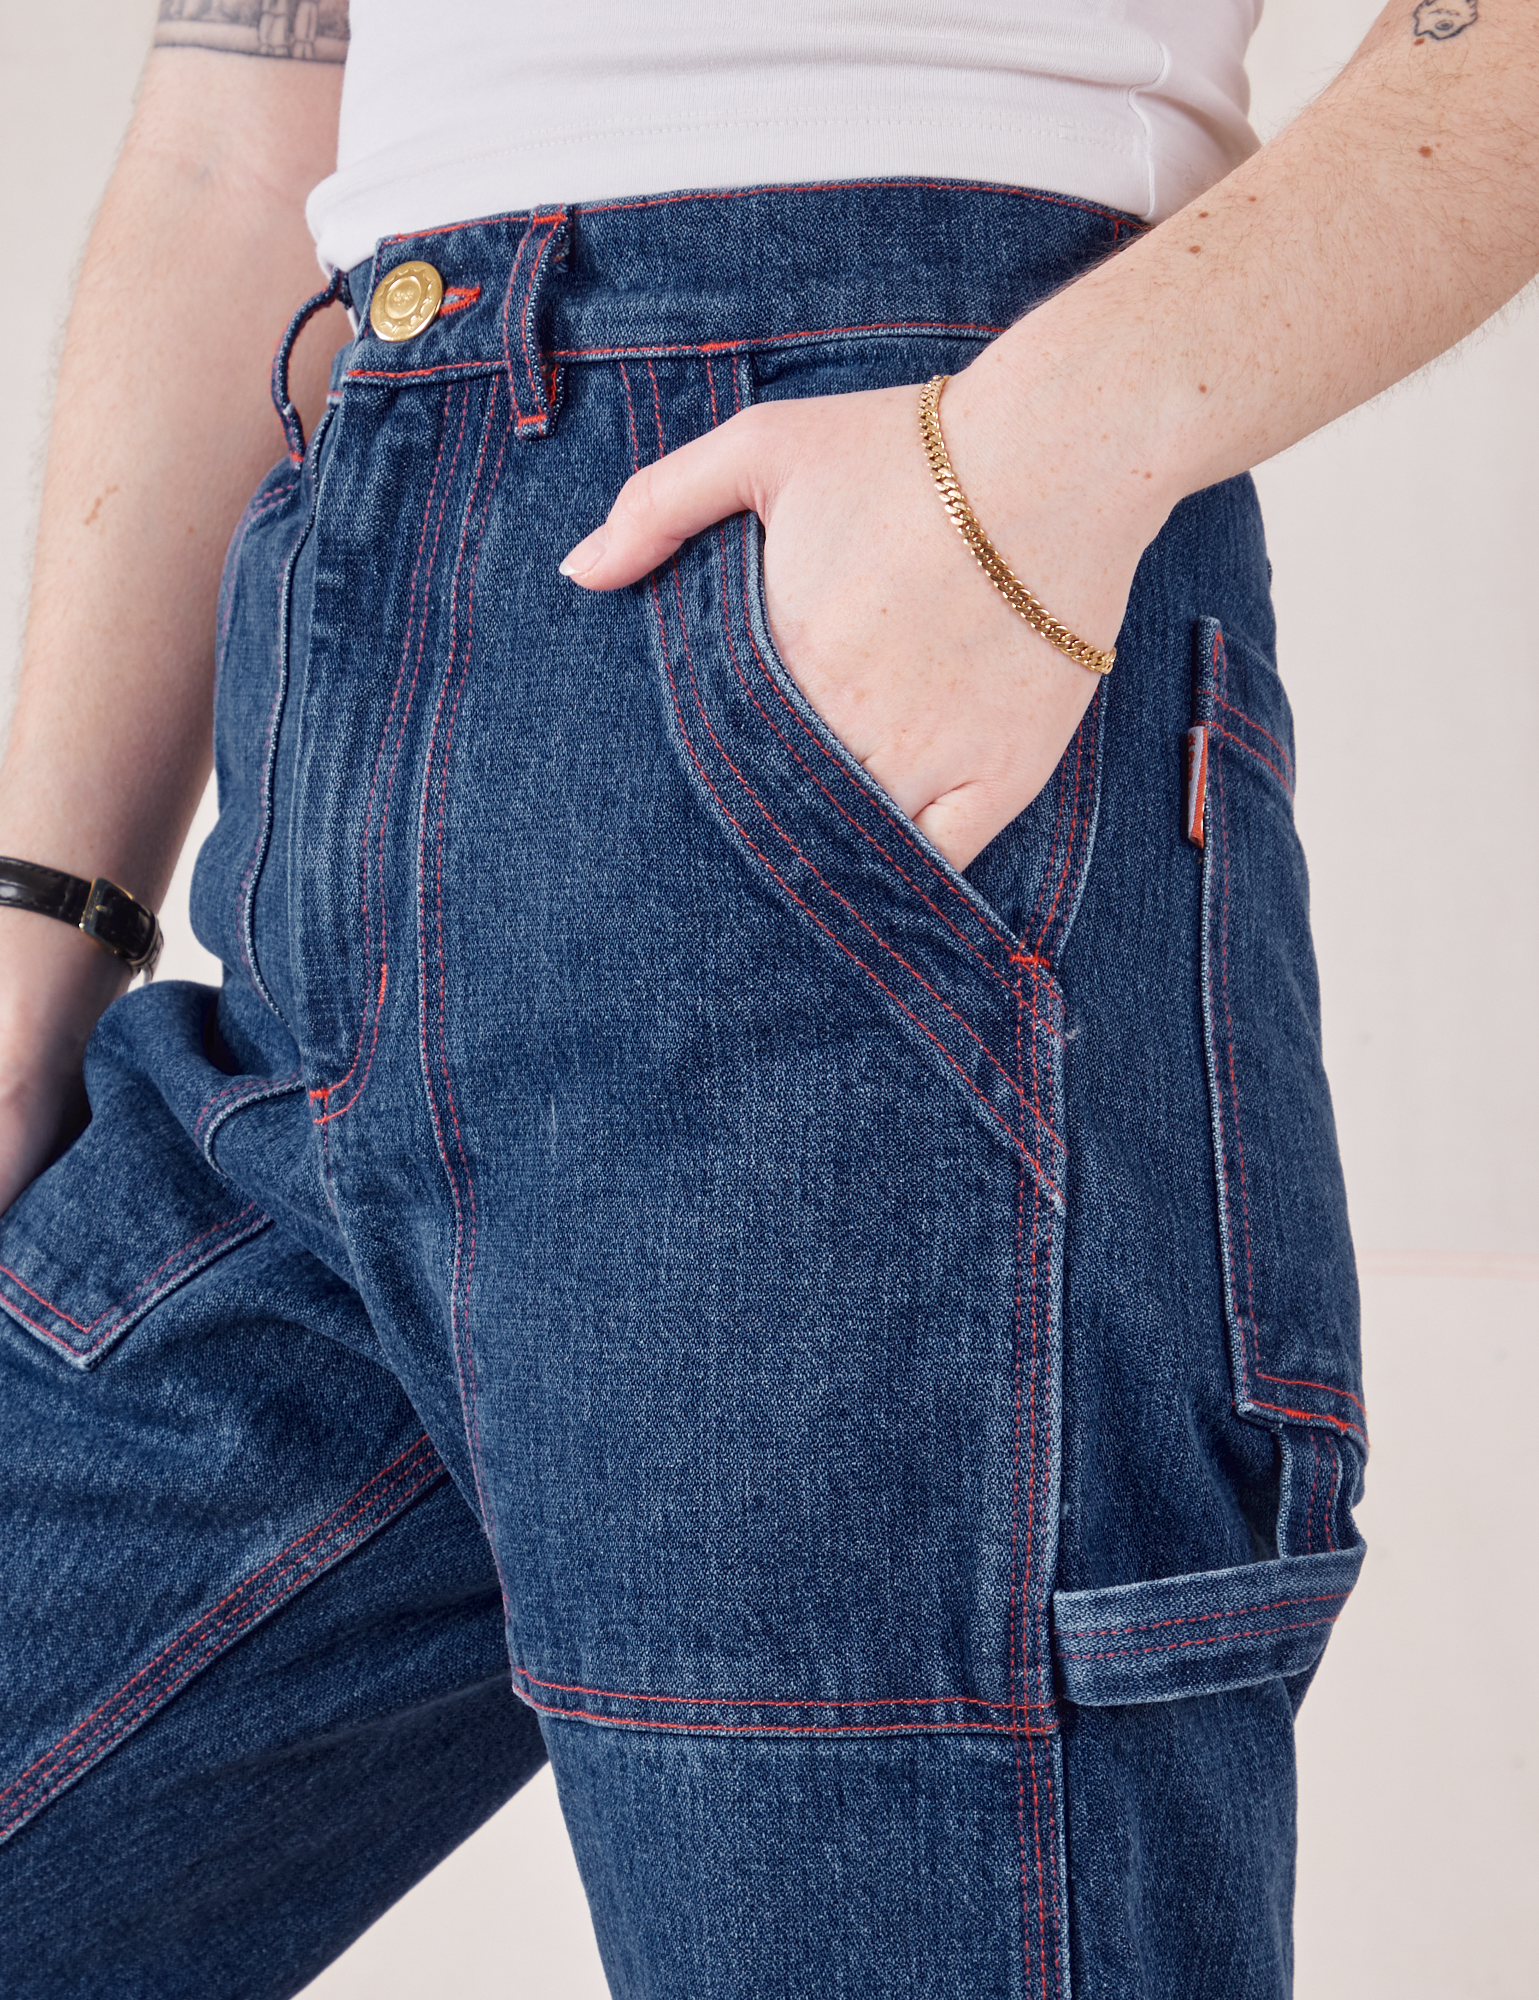 Front pocket close up of Petite Carpenter Jeans in Dark Wash. Hana has her hand in the pocket.